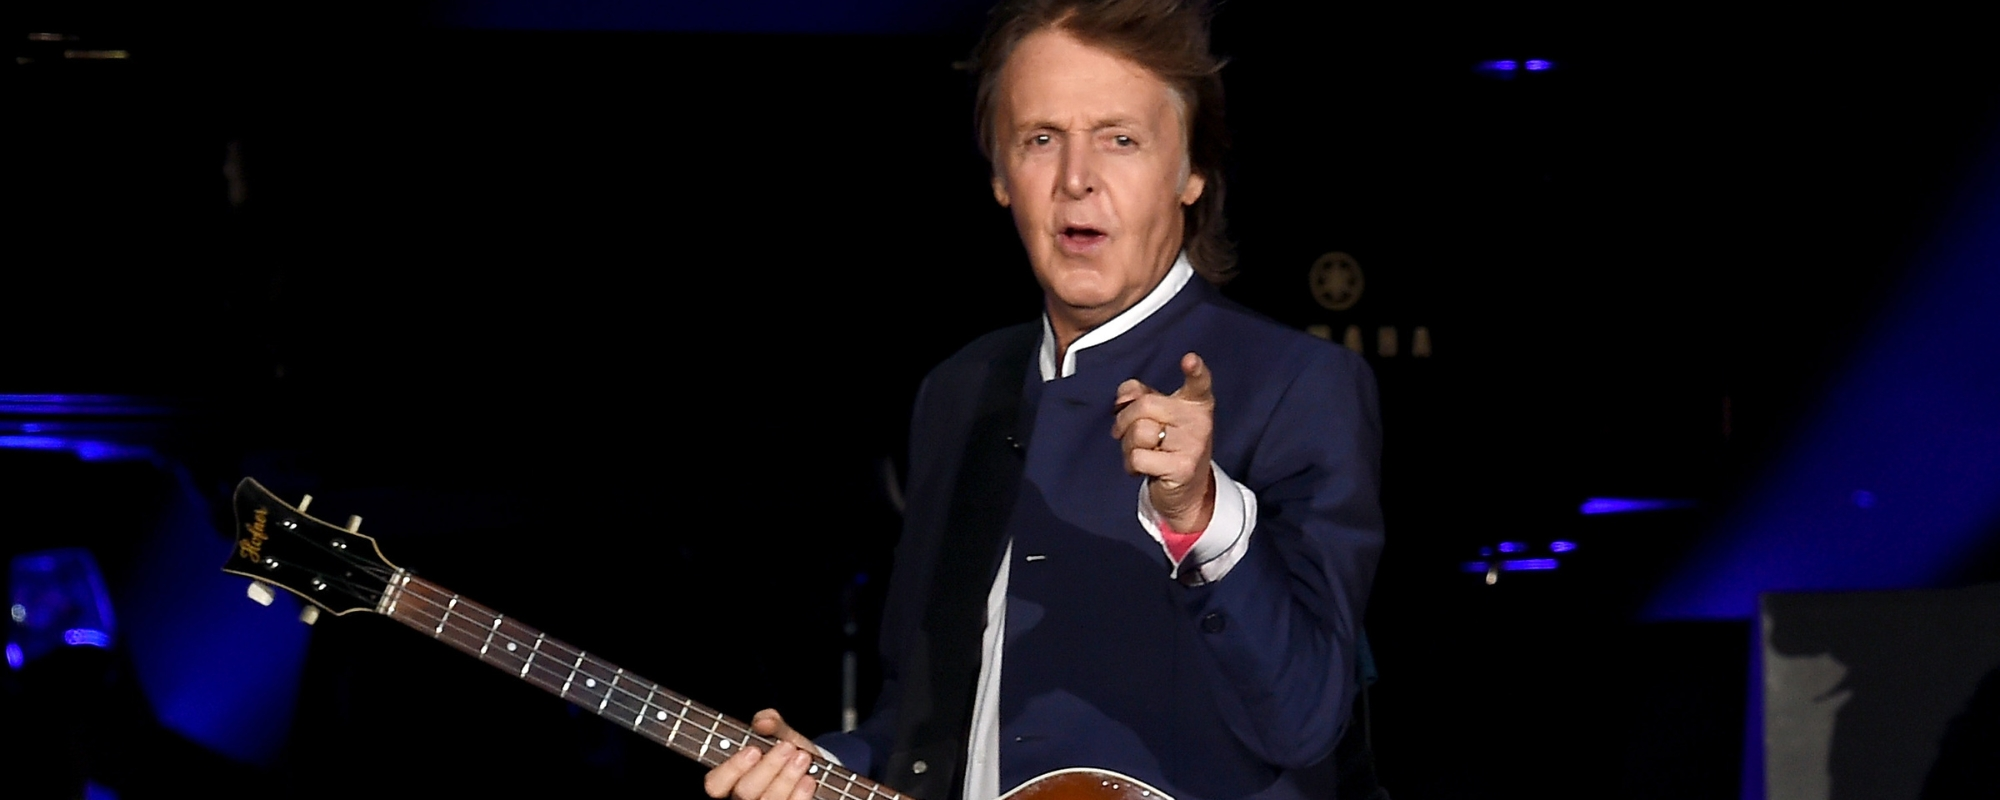 “Paul McCartney Woz Here!” Signed Hofner Bass Could Net Hundreds of Thousands of Dollars in Online Auction